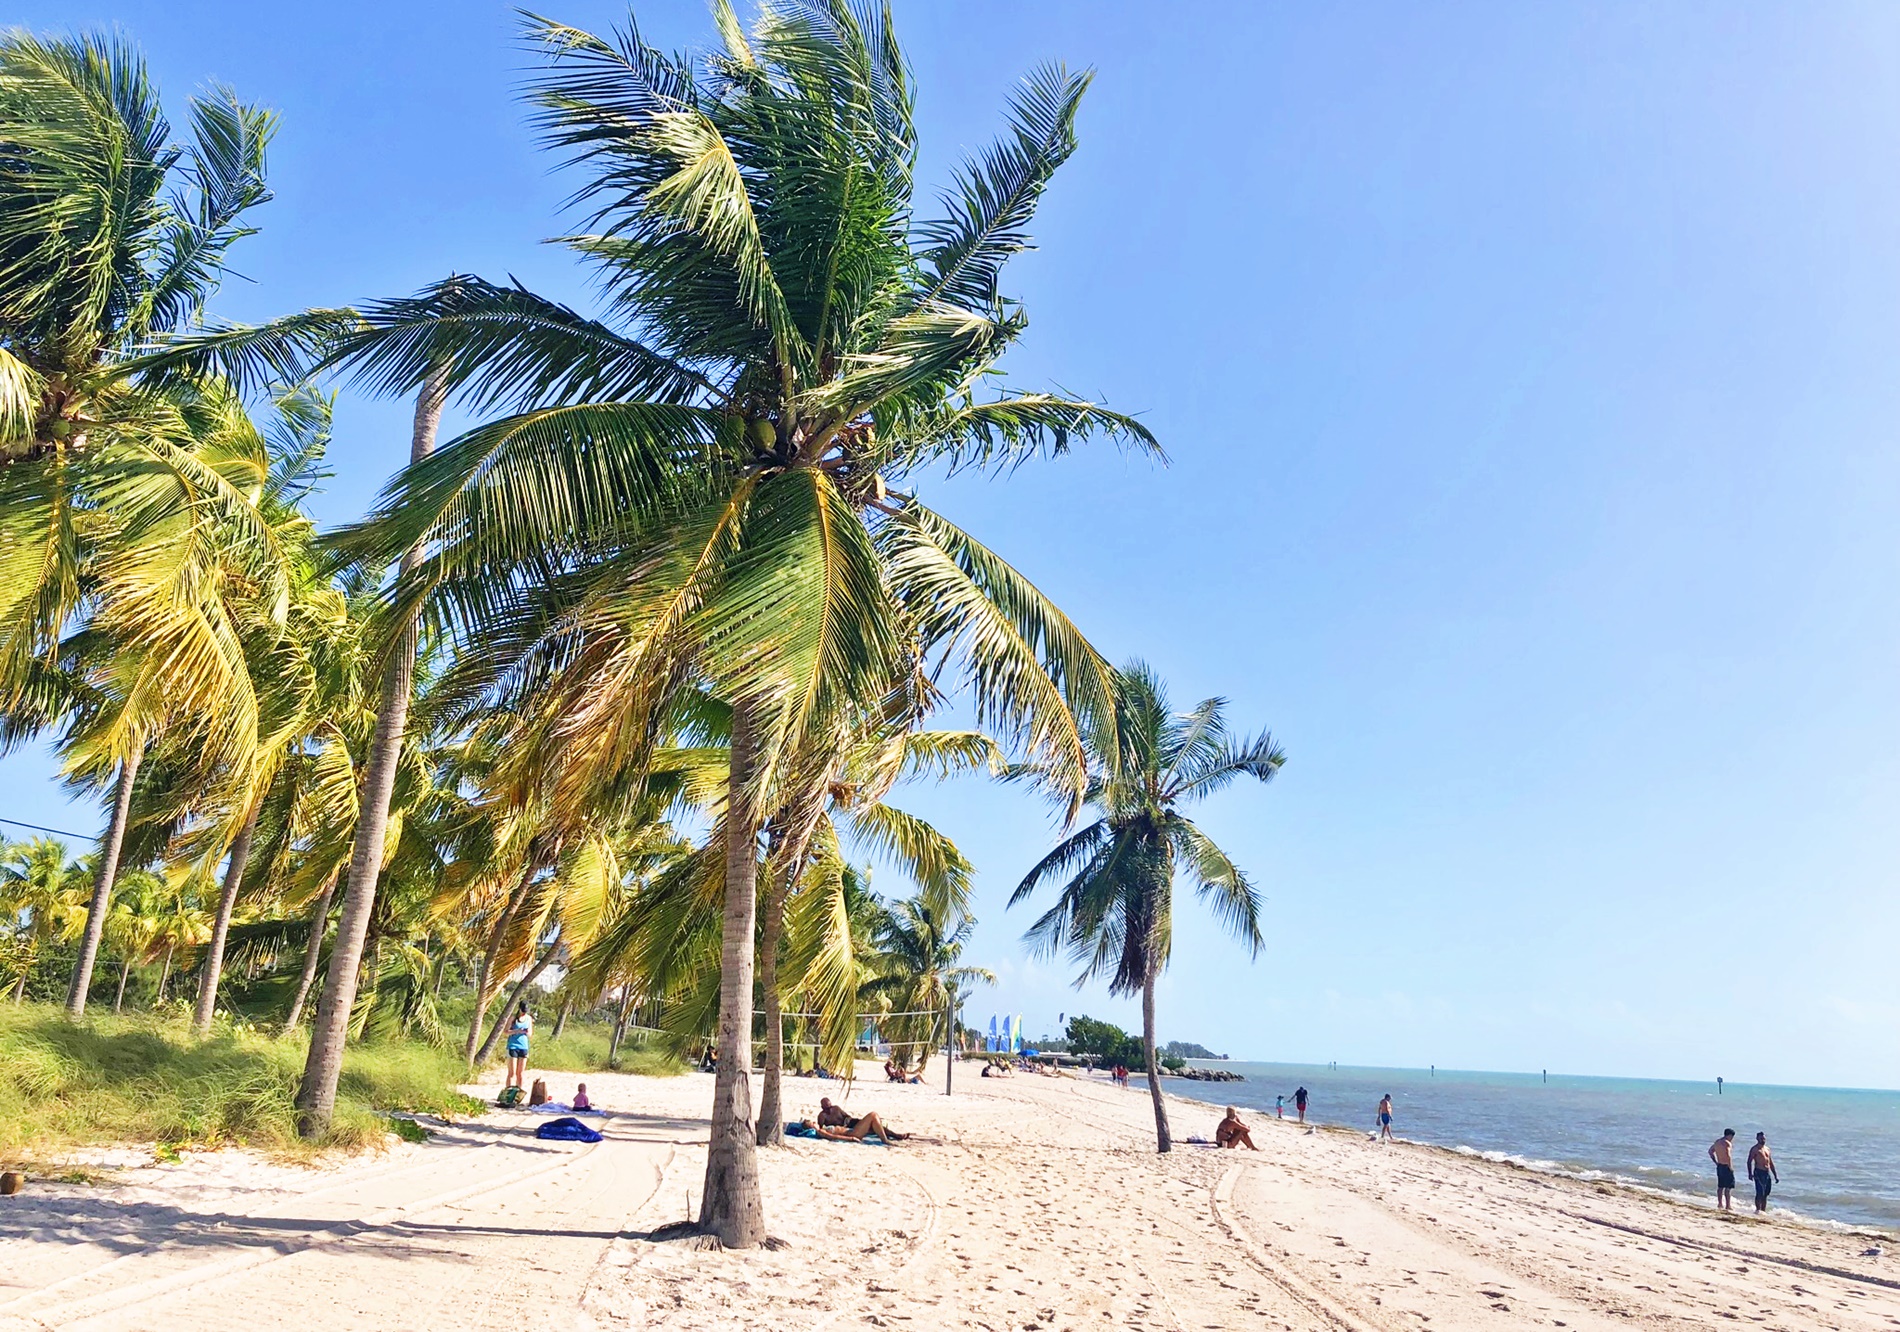 Smathers Beach in Key West is one of the best beaches to explore in South Florida!